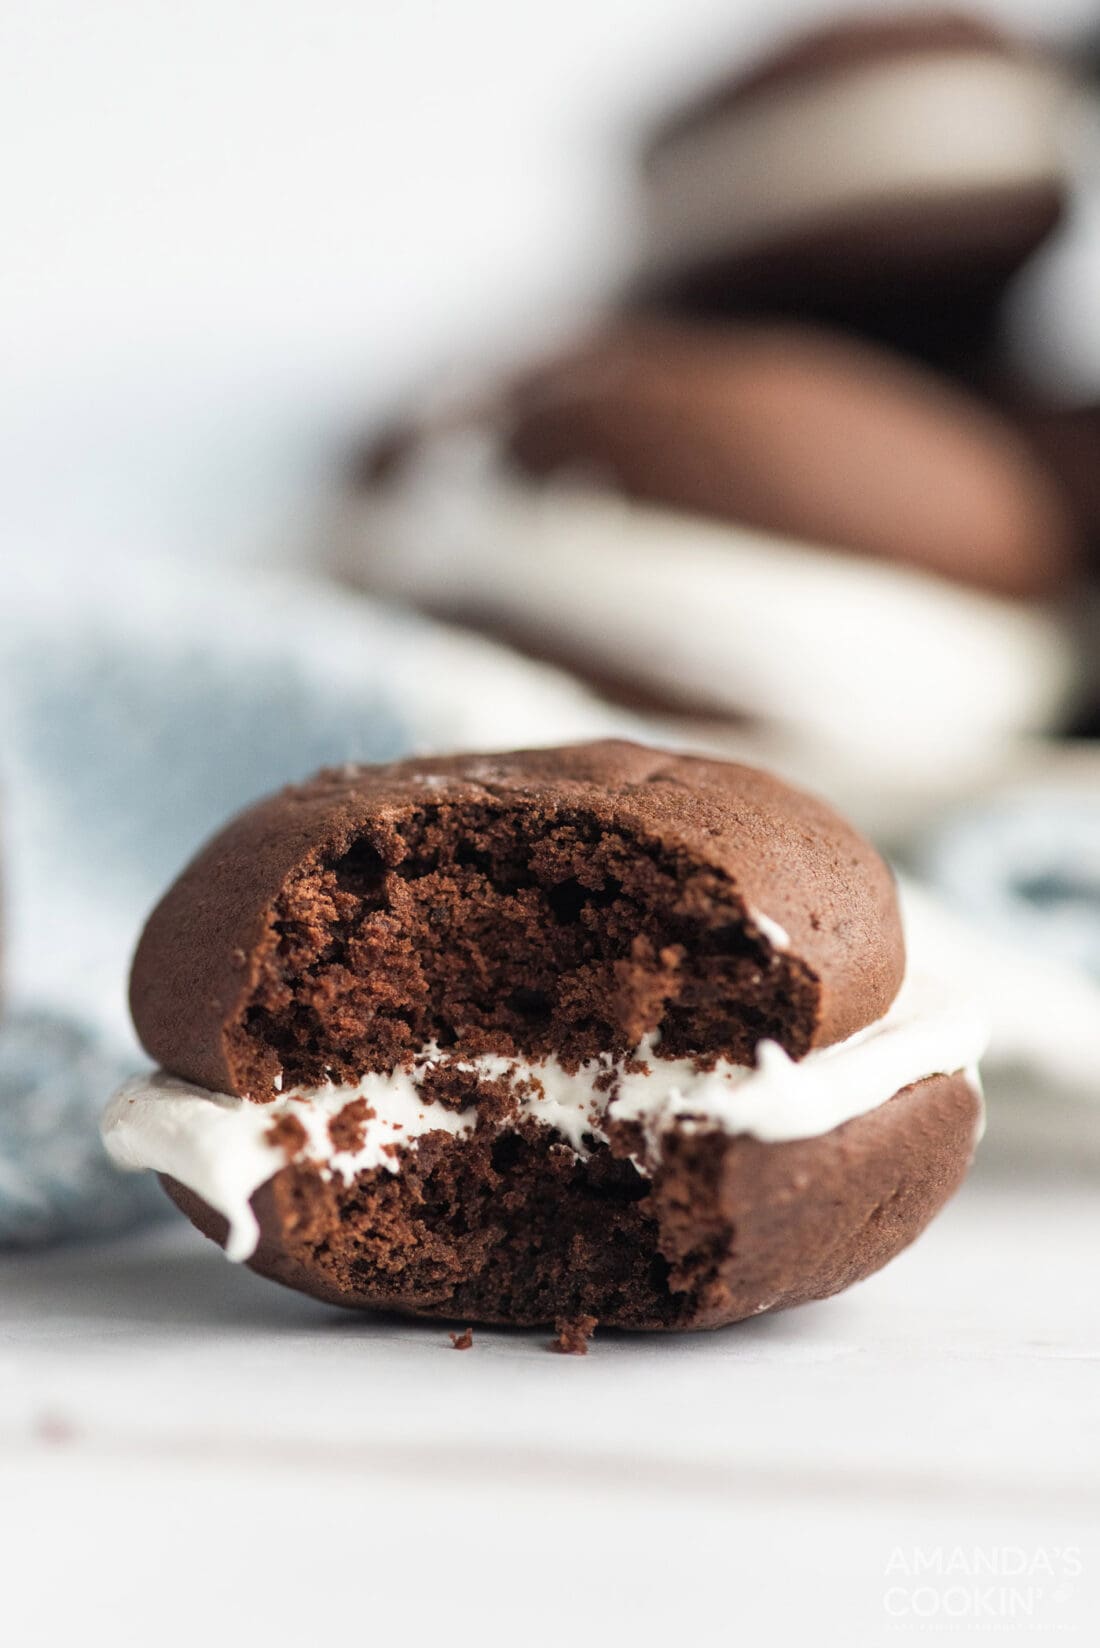 Chocolate Whoopie Pie with a bite out of it